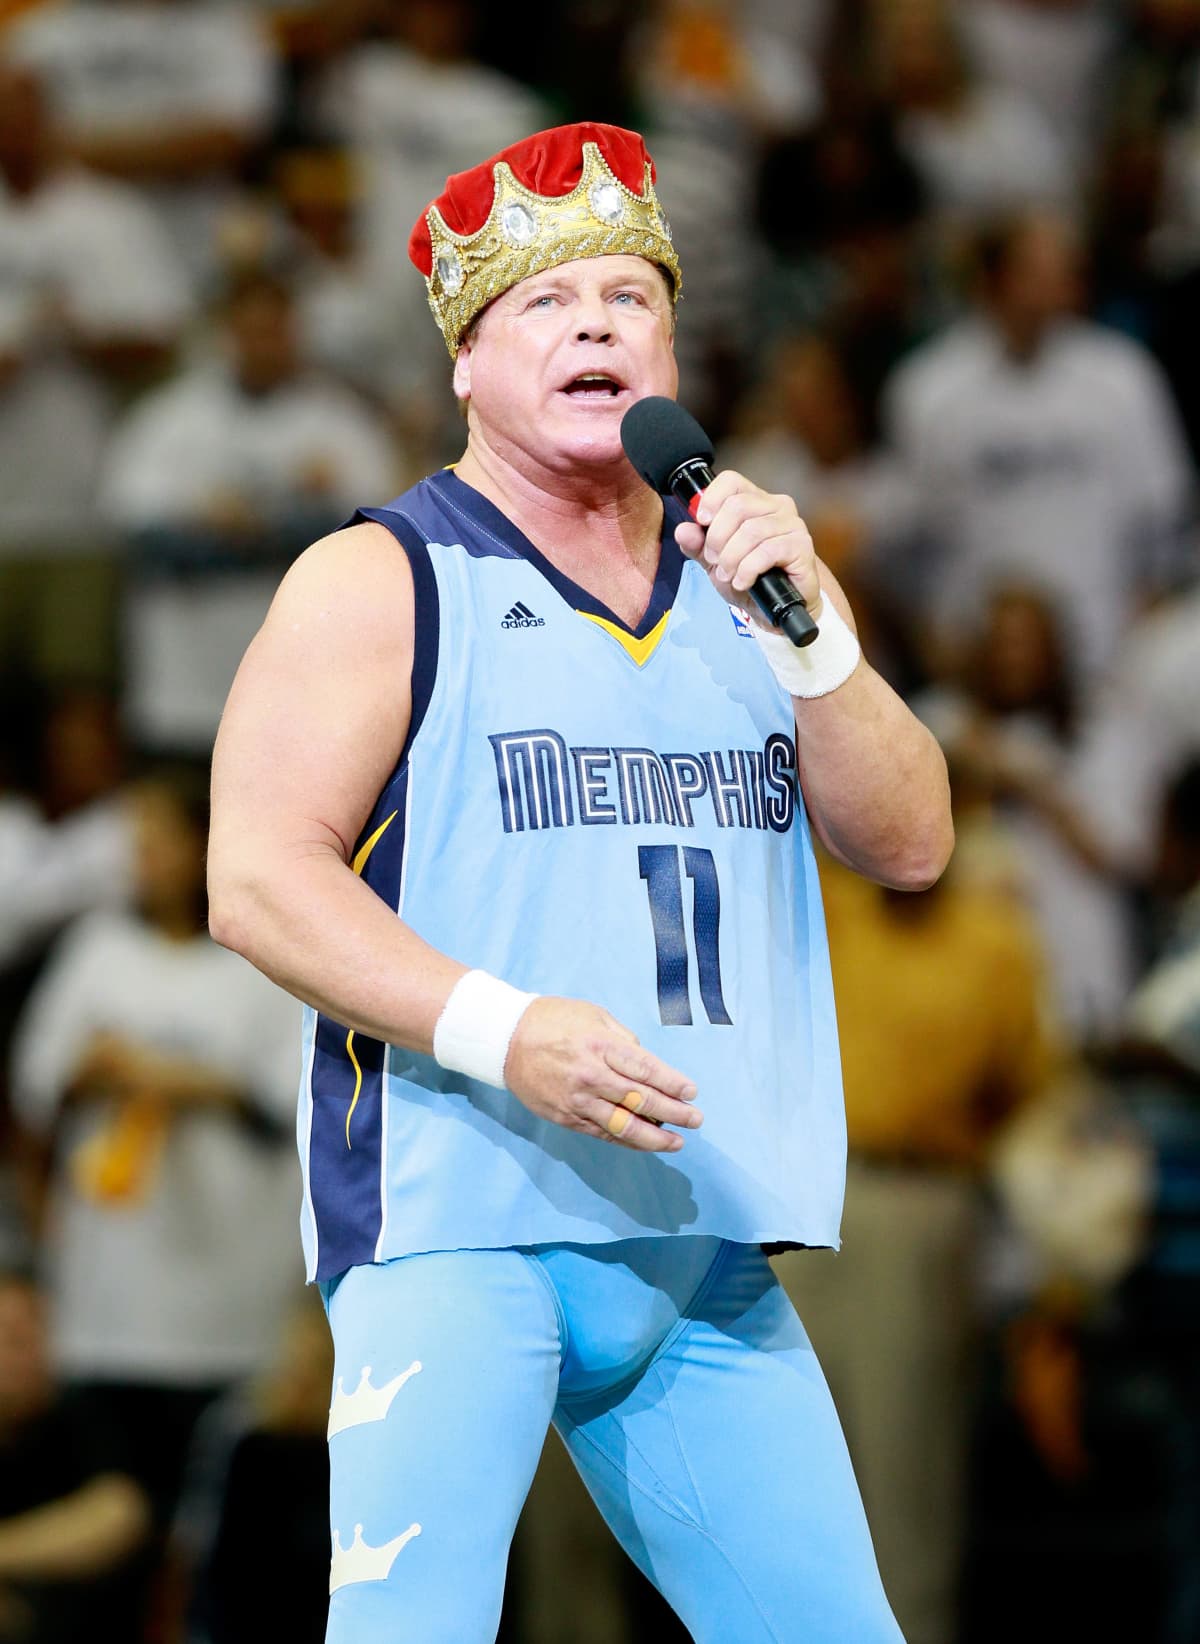 MEMPHIS, TN - MAY 13:  Professional wrestler Jerry "The King" Lawler address the fans prior to to Game Seven of the Western Conference Quarterfinals in the 2012 NBA Playoffs between the Memphis Grizzlies and the Los Angeles Clippers at FedExForum on May 13, 2012 in Memphis, Tennessee.  NOTE TO USER: User expressly acknowledges and agrees that, by downloading and or using this photograph, User is consenting to the terms and conditions of the Getty Images License Agreement  (Photo by Kevin C. Cox/Getty Images)